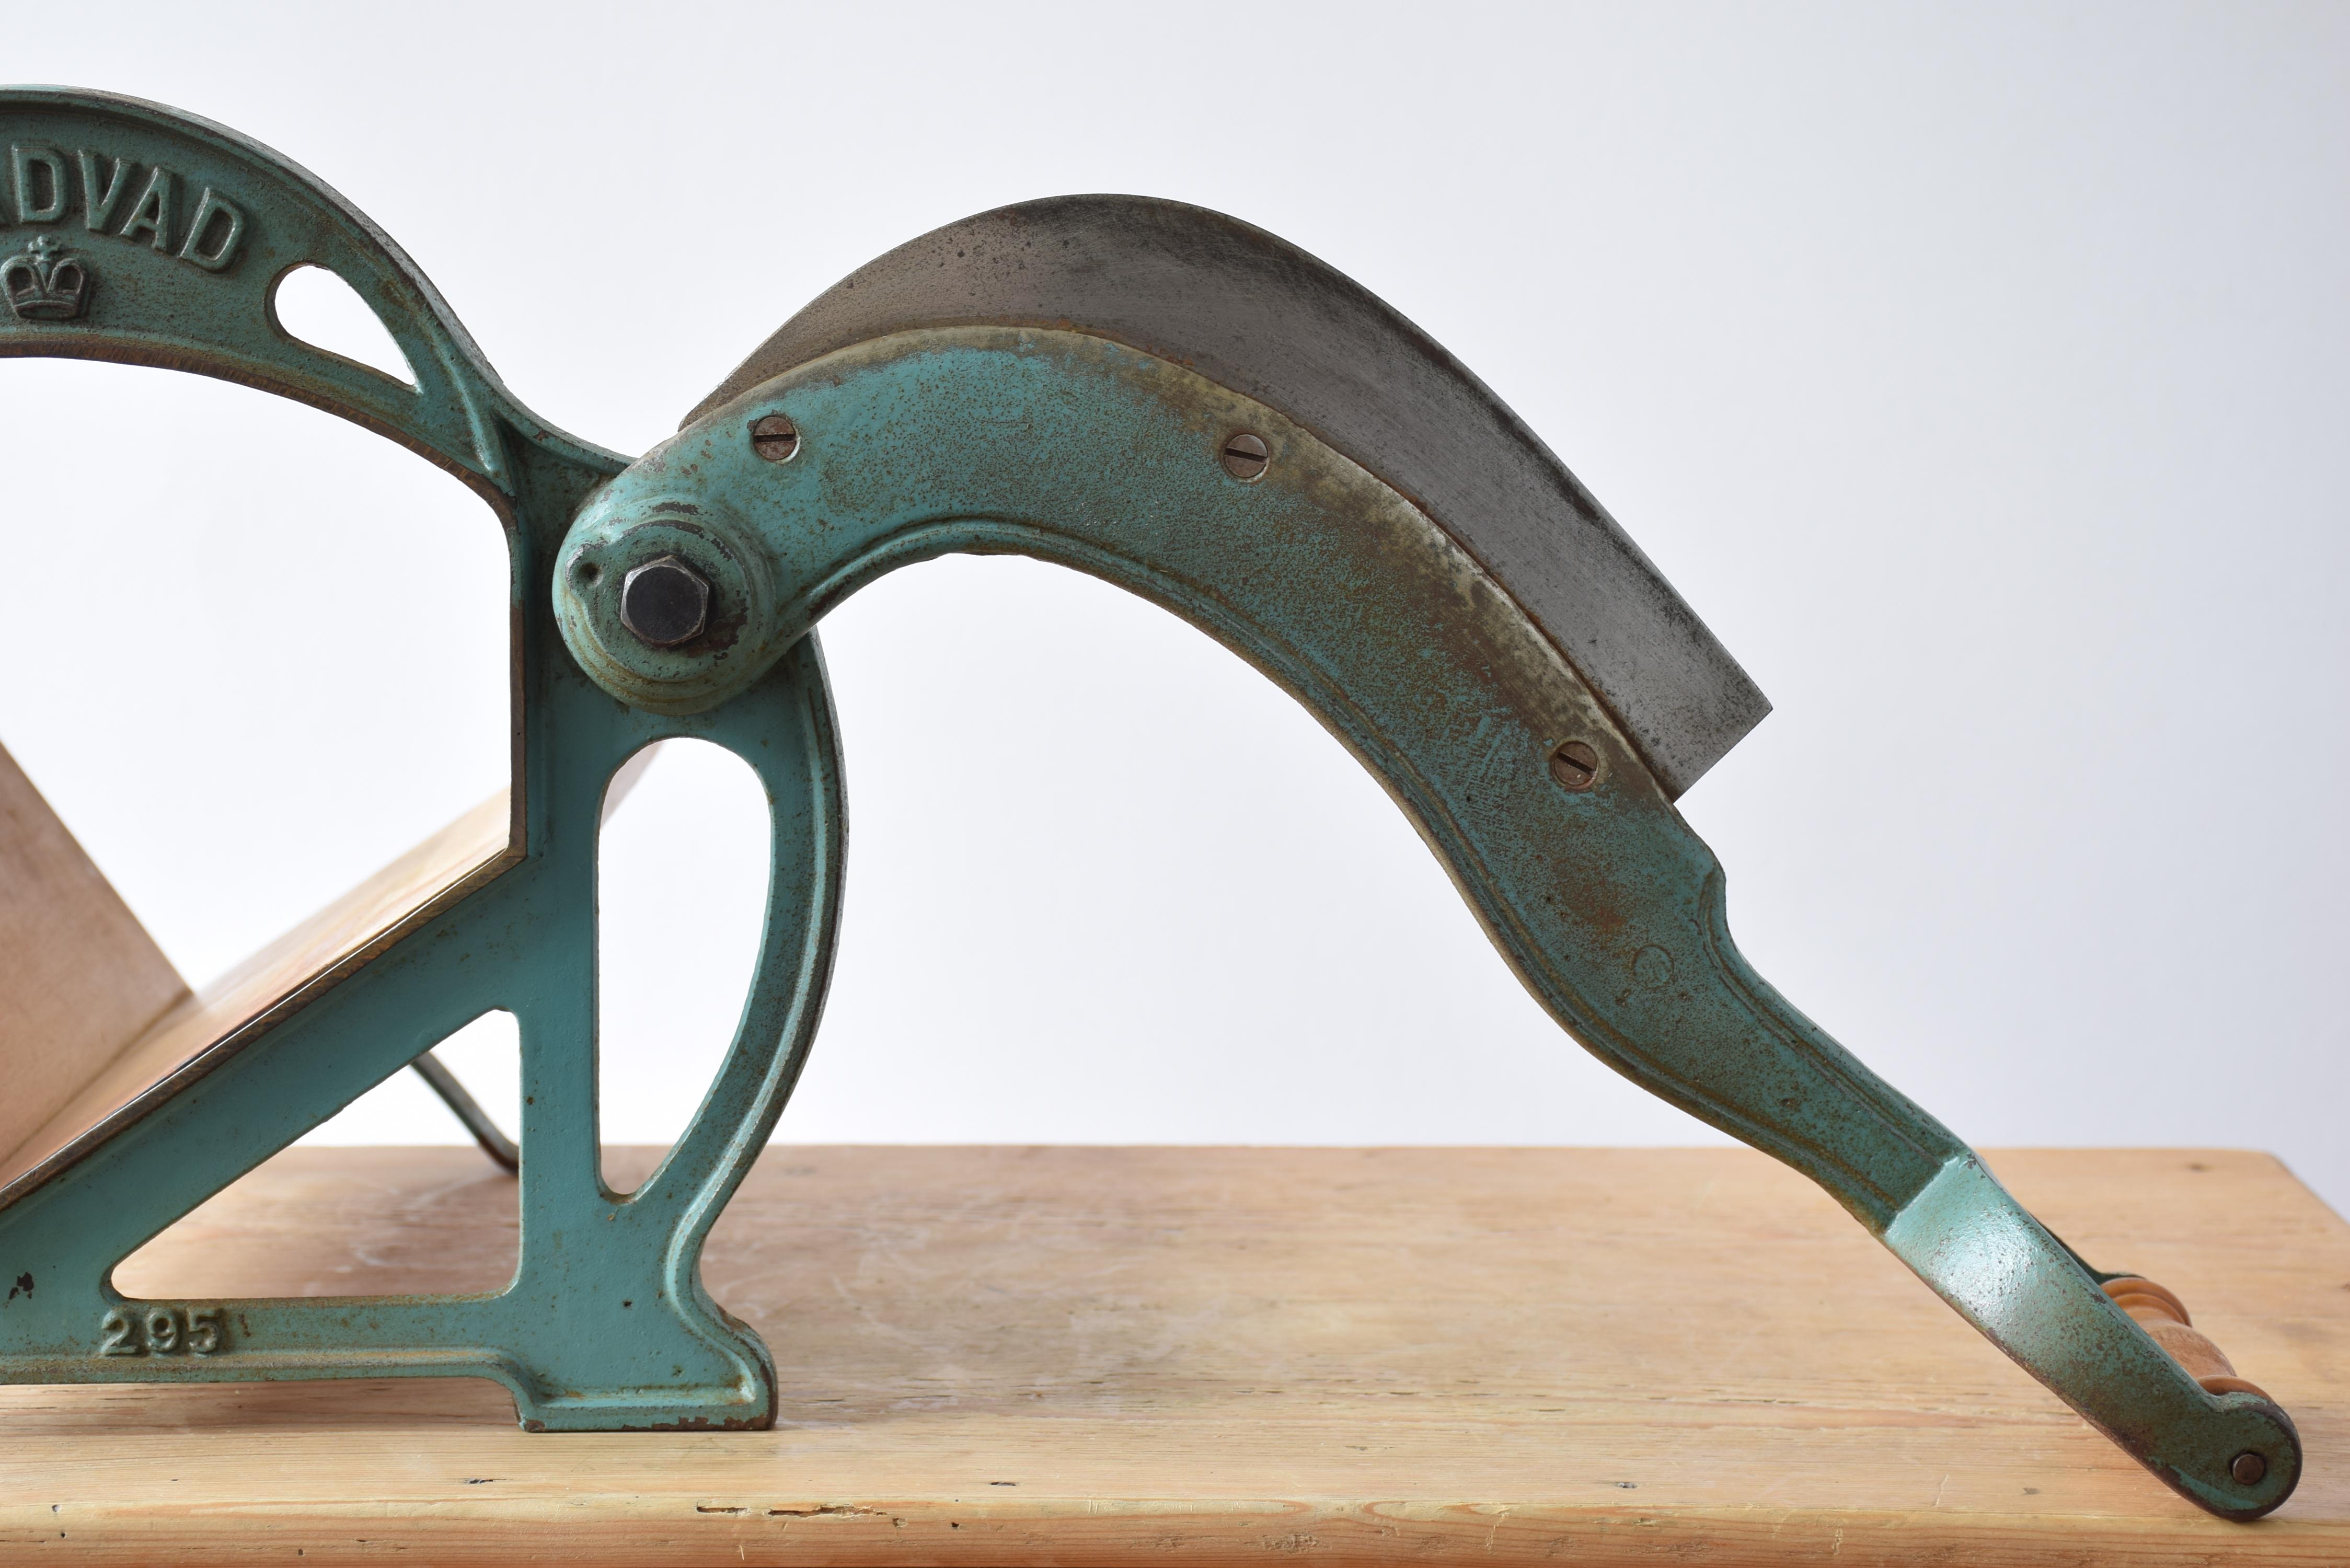 Danish Raadvad Bread Slicer Art Nouveau Style in Blue with Great Patina, 1920s For Sale 1